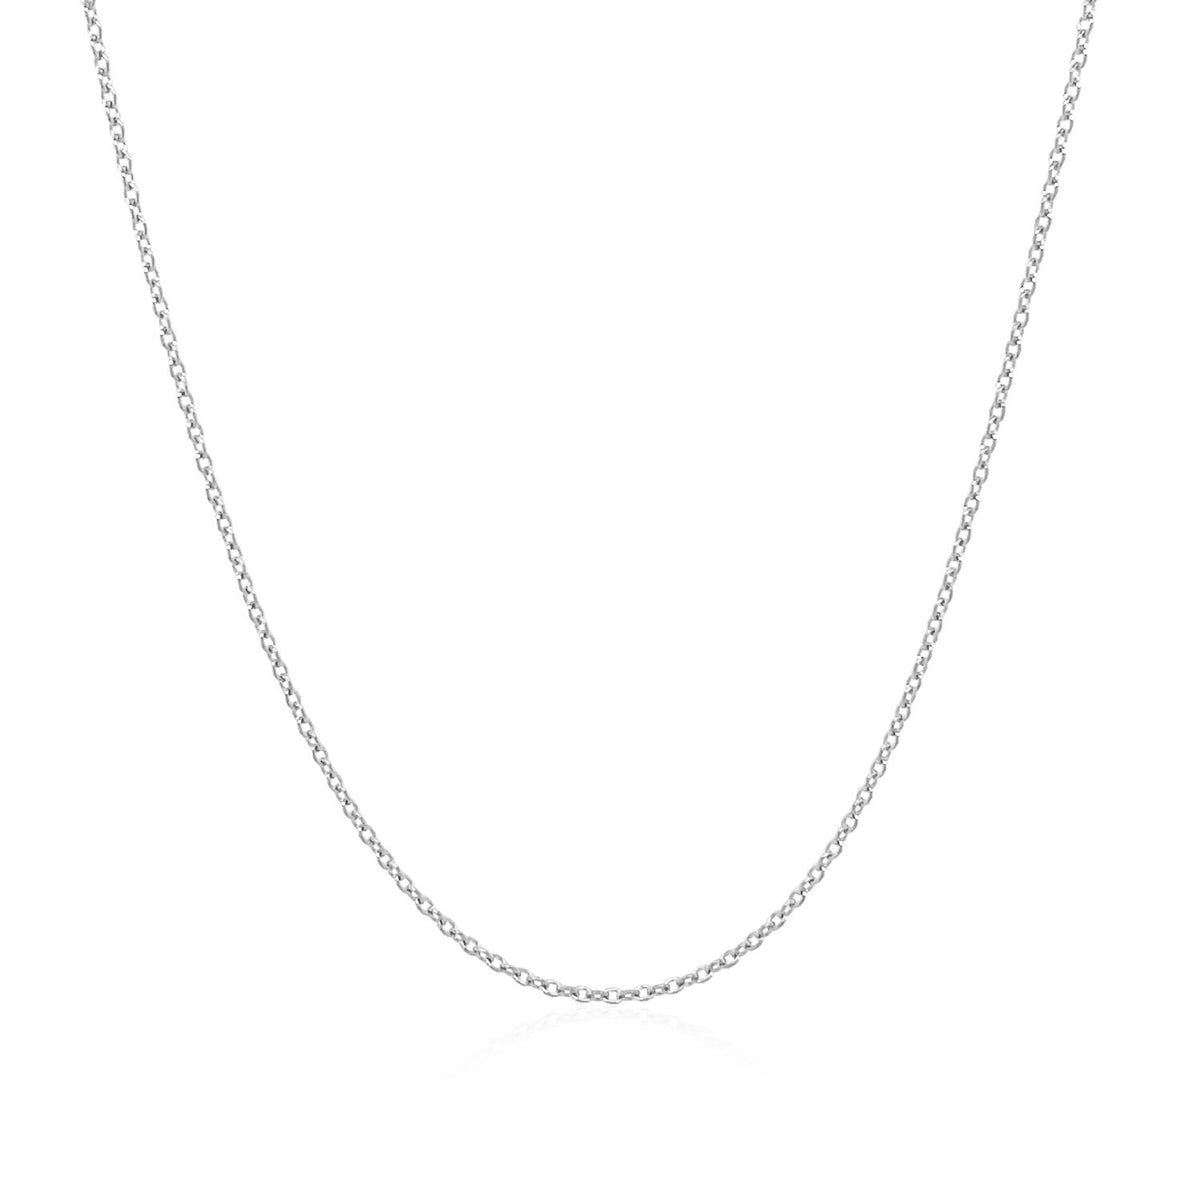 Oval Cable Link Chain - 14k White Gold 0.97mm